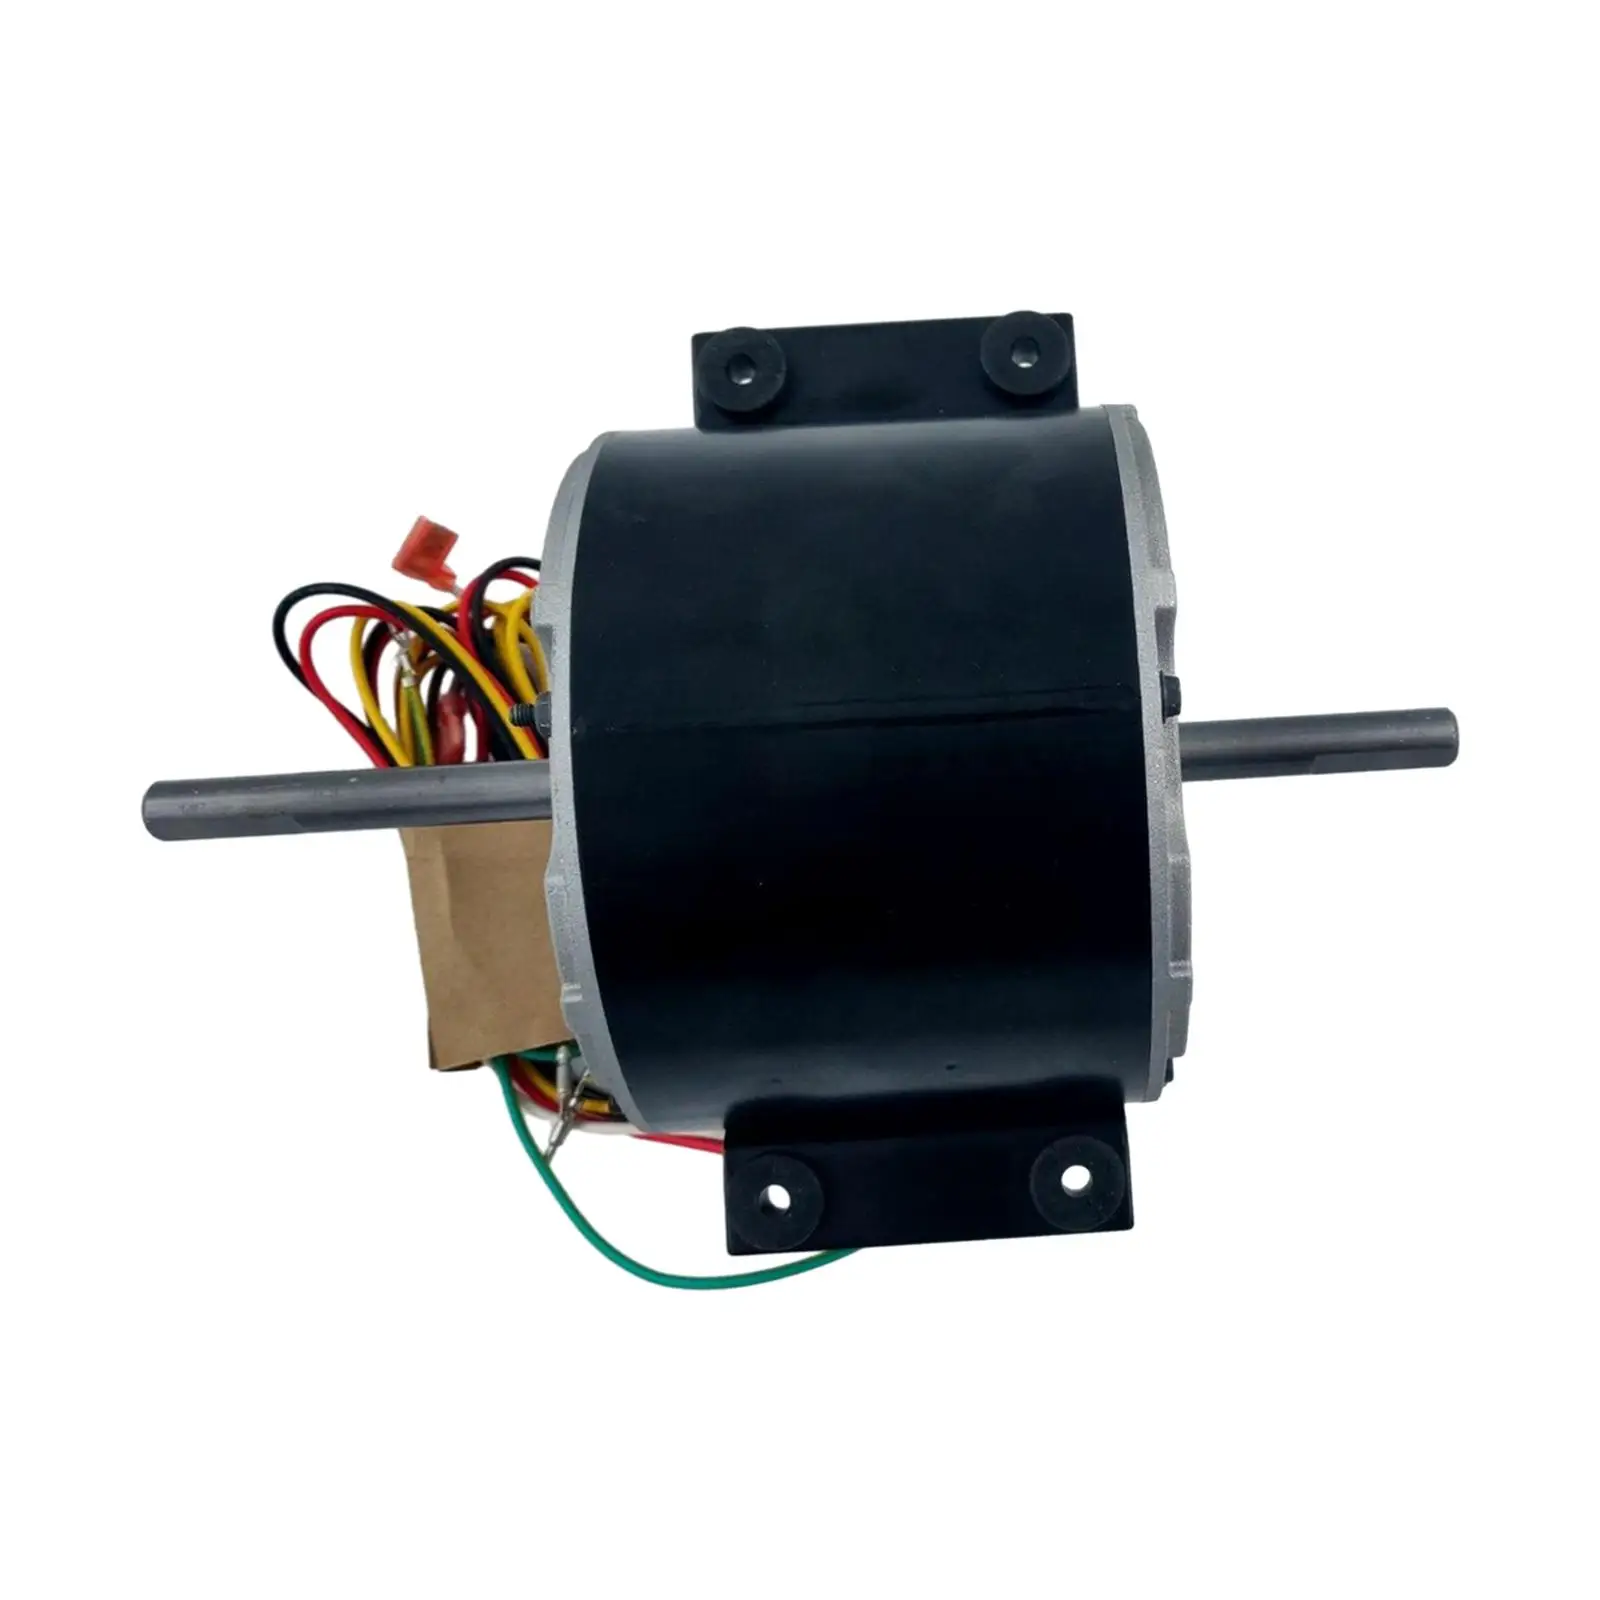 Condenser Fan Motor 3315332.005 Aluminum Alloy Replacement Parts for II Penguin B59516 B59196 B59186 Accessories